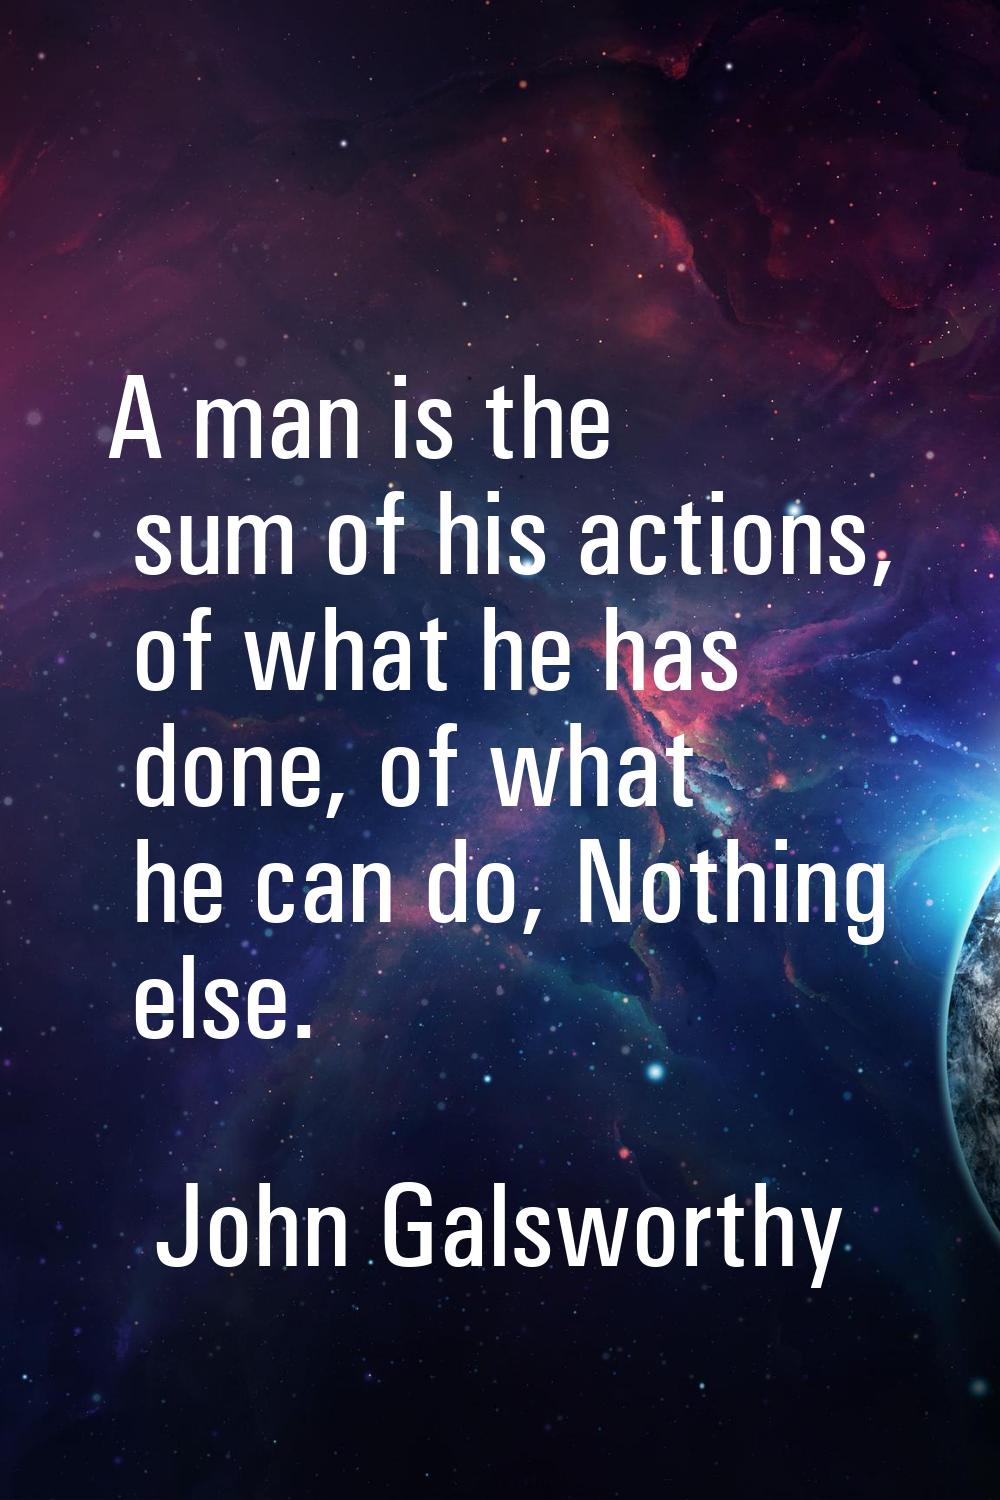 A man is the sum of his actions, of what he has done, of what he can do, Nothing else.